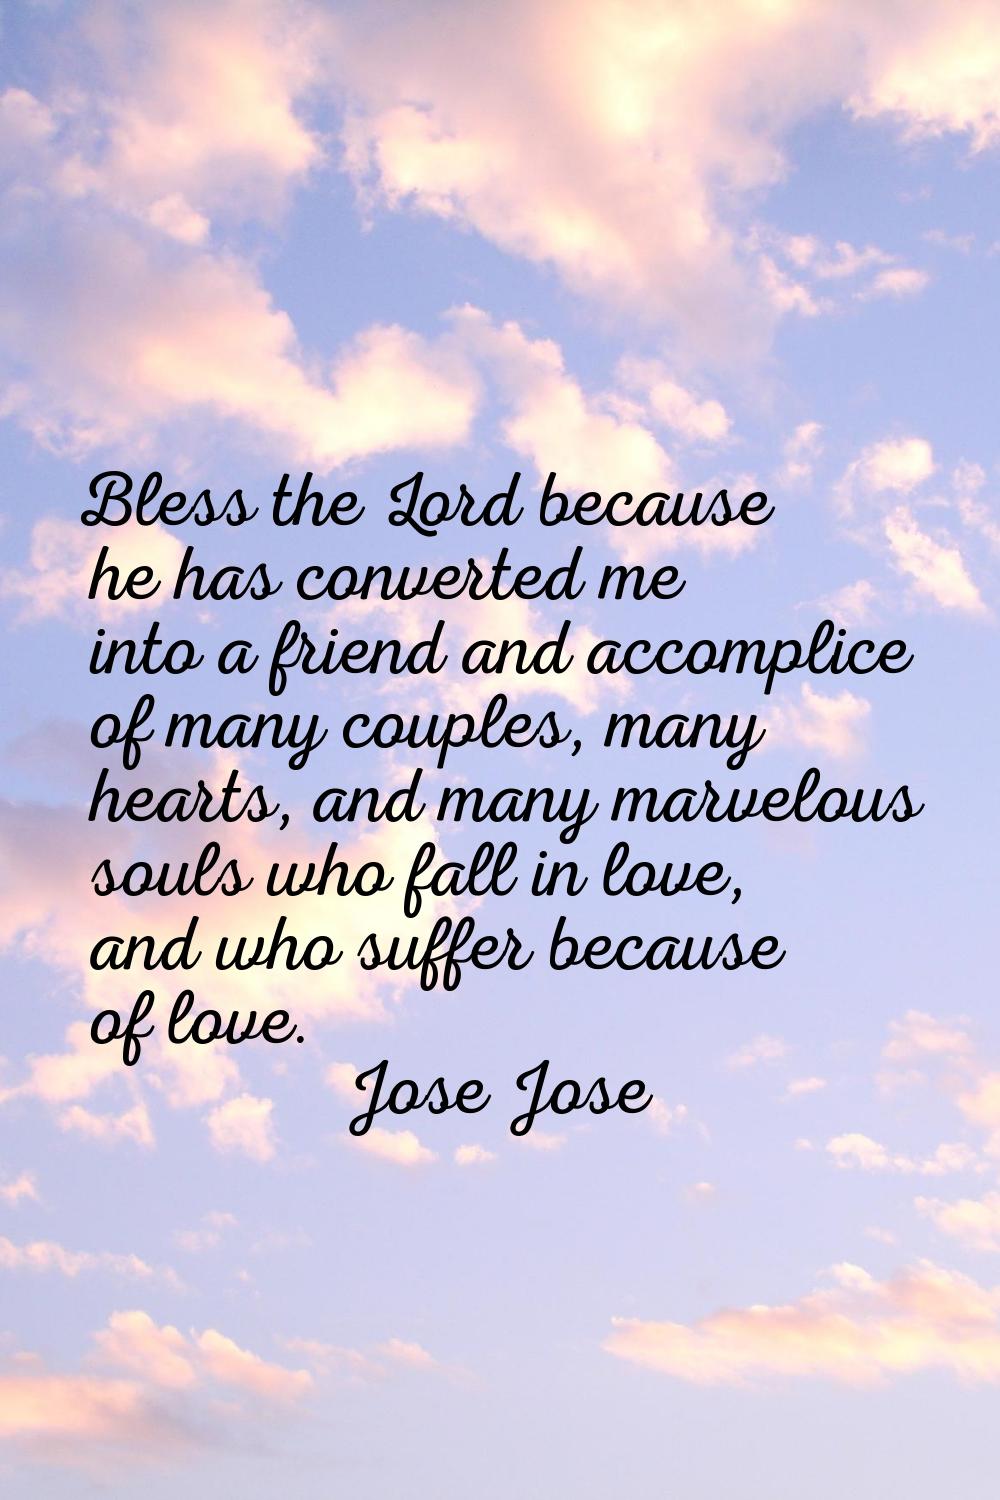 Bless the Lord because he has converted me into a friend and accomplice of many couples, many heart